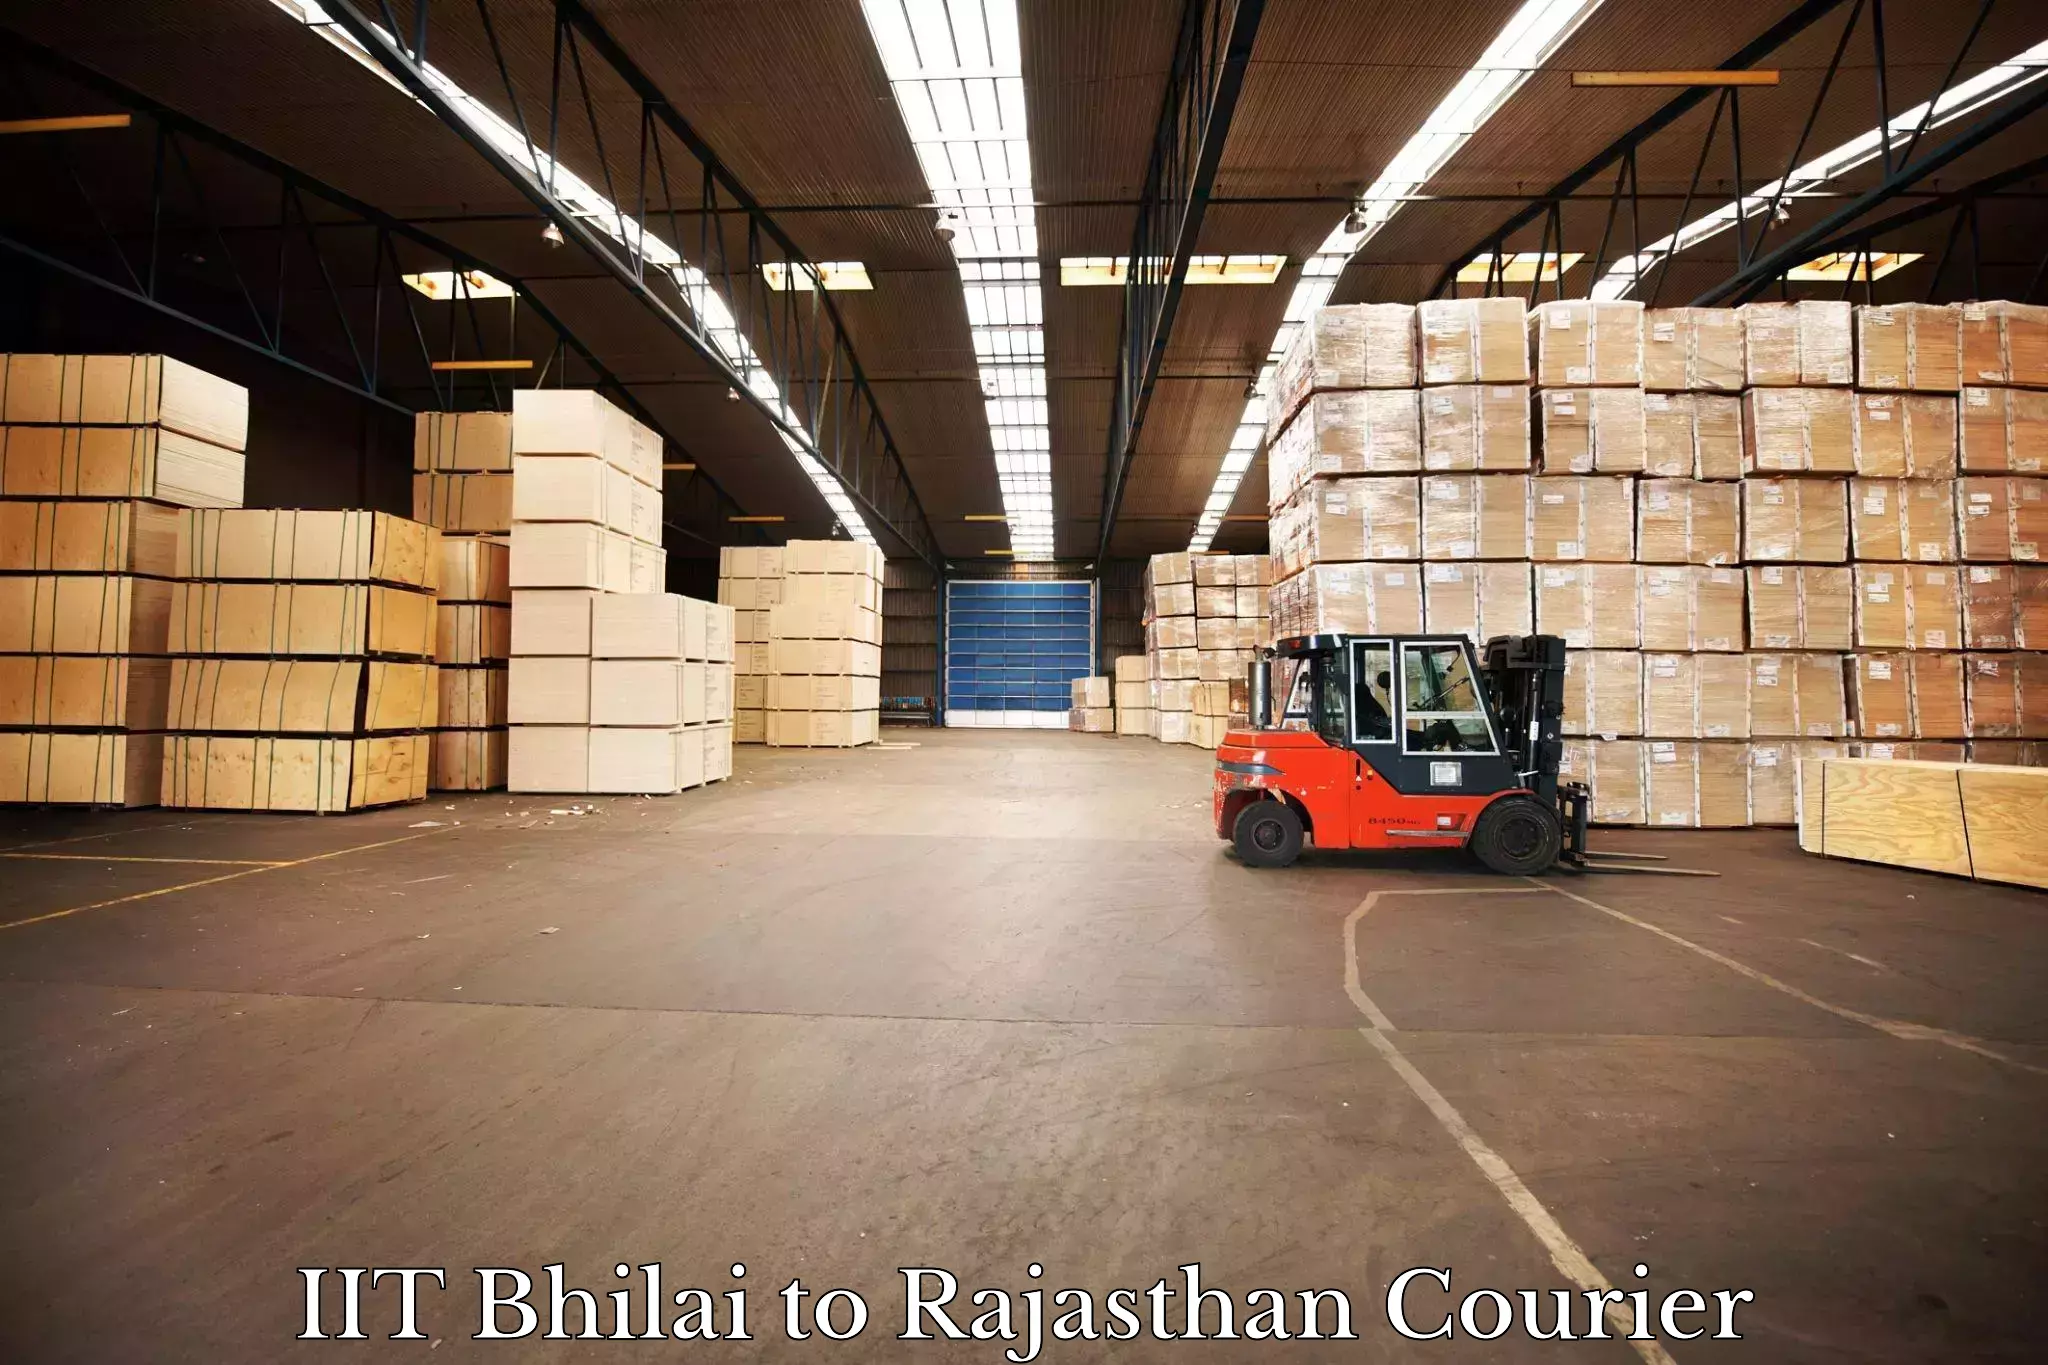 Next-day delivery options IIT Bhilai to Ajmer